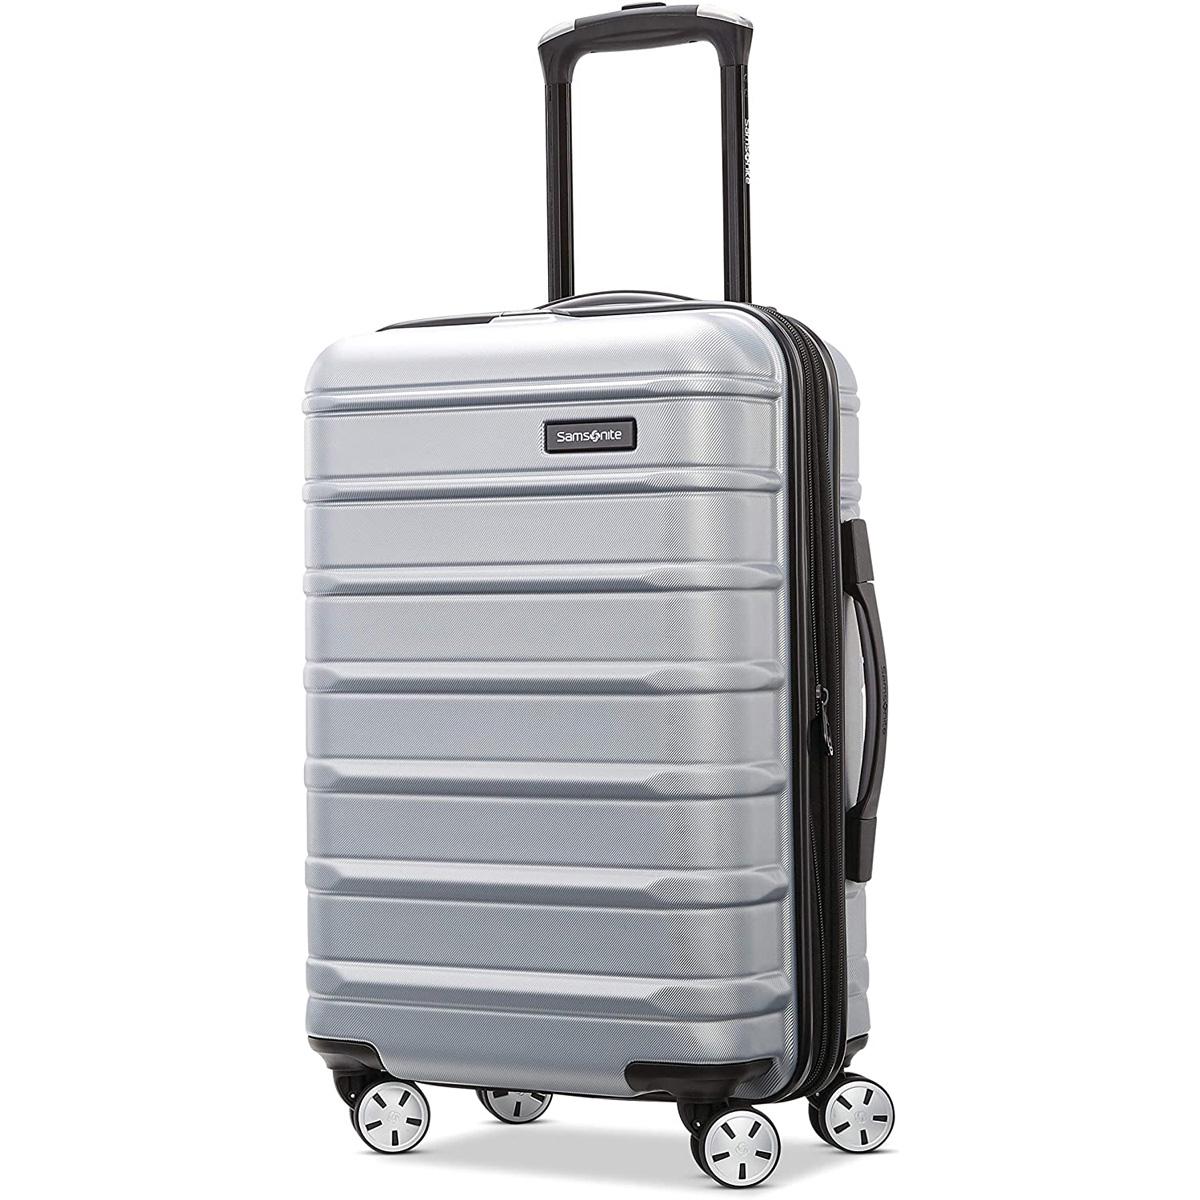 20in Samsonite Omni 2 Hardside Expandable Carry-On Luggage for $84.30 Shipped